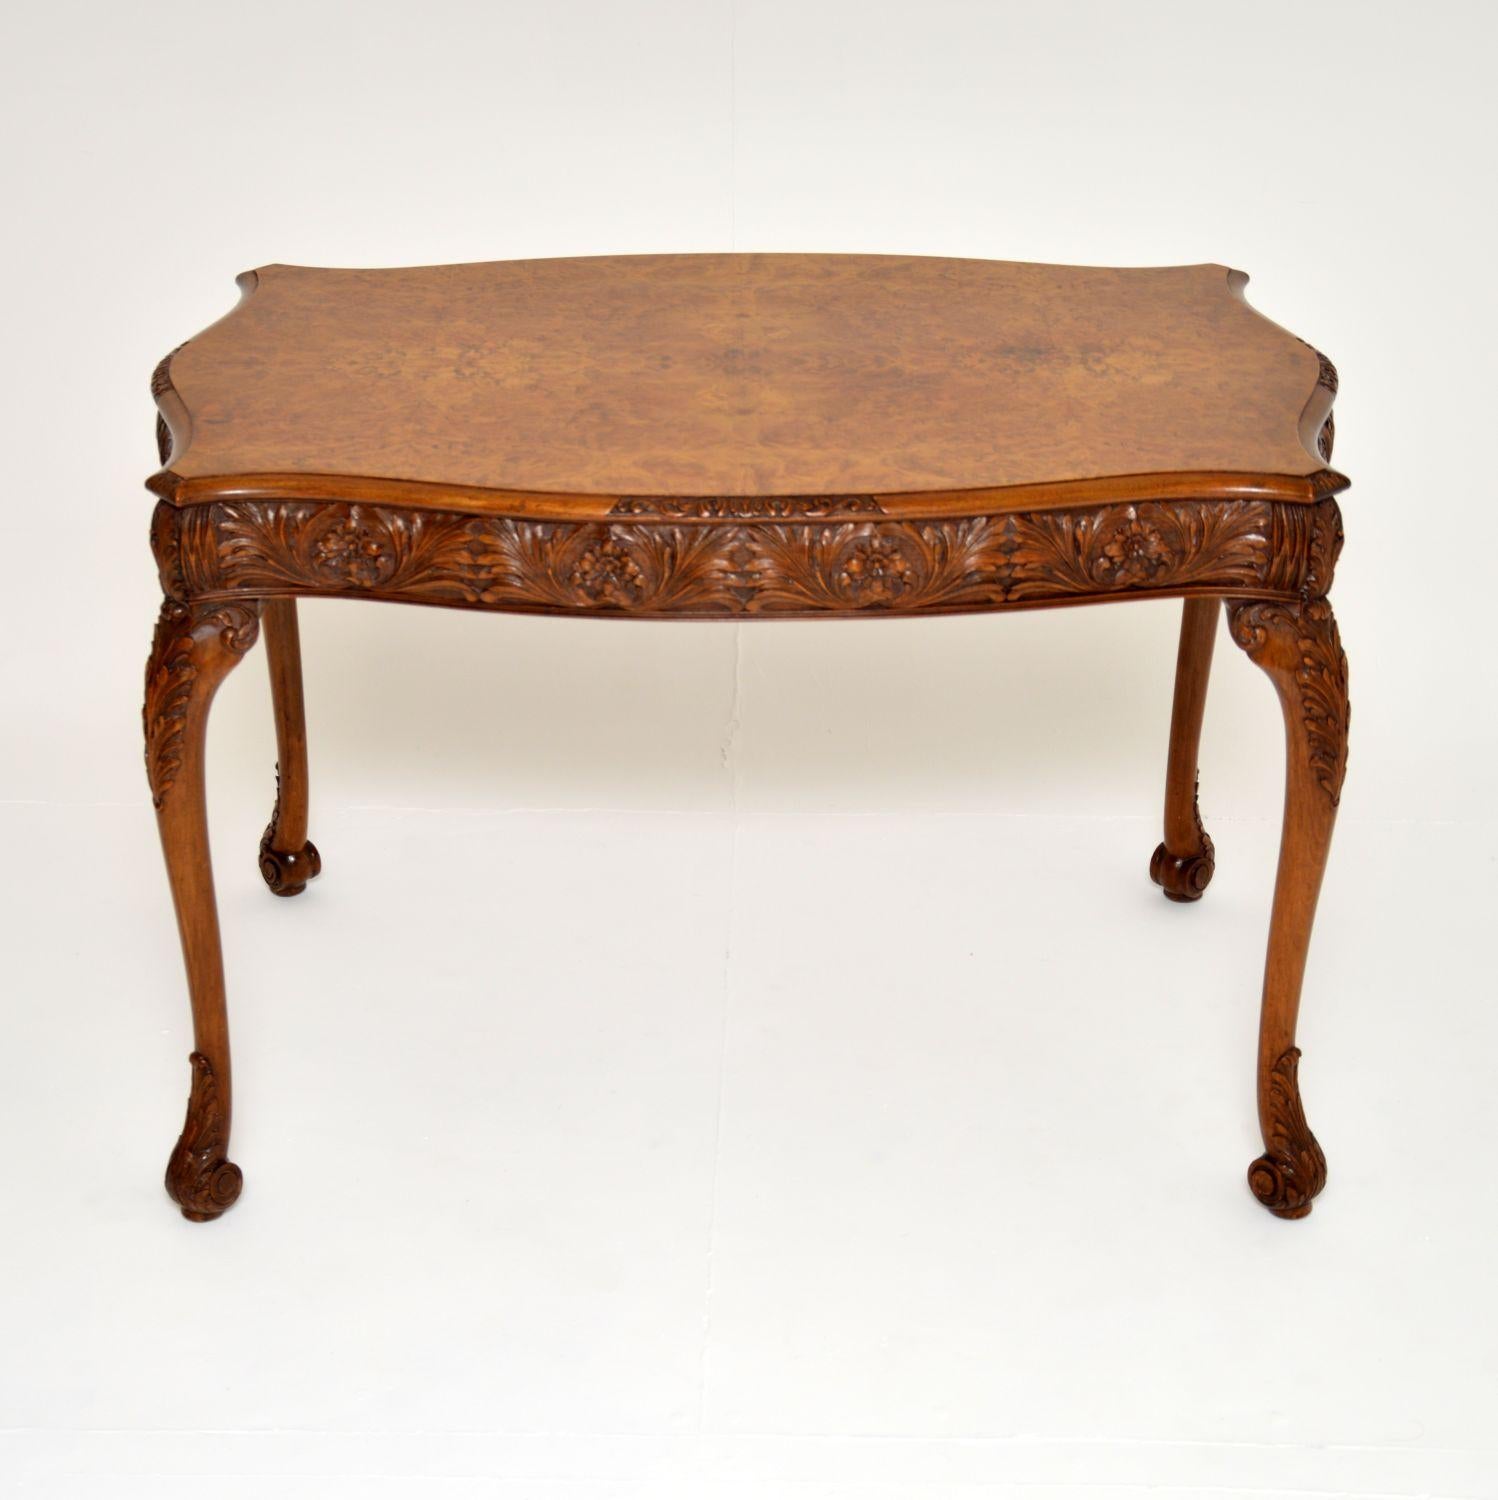 A magnificent antique carved walnut occasional table in the Queen Anne style. This was made in England, it dates from around the 1920’s period.

It is of superb quality, with stunning and intricate carving around all the edges, on the tops &